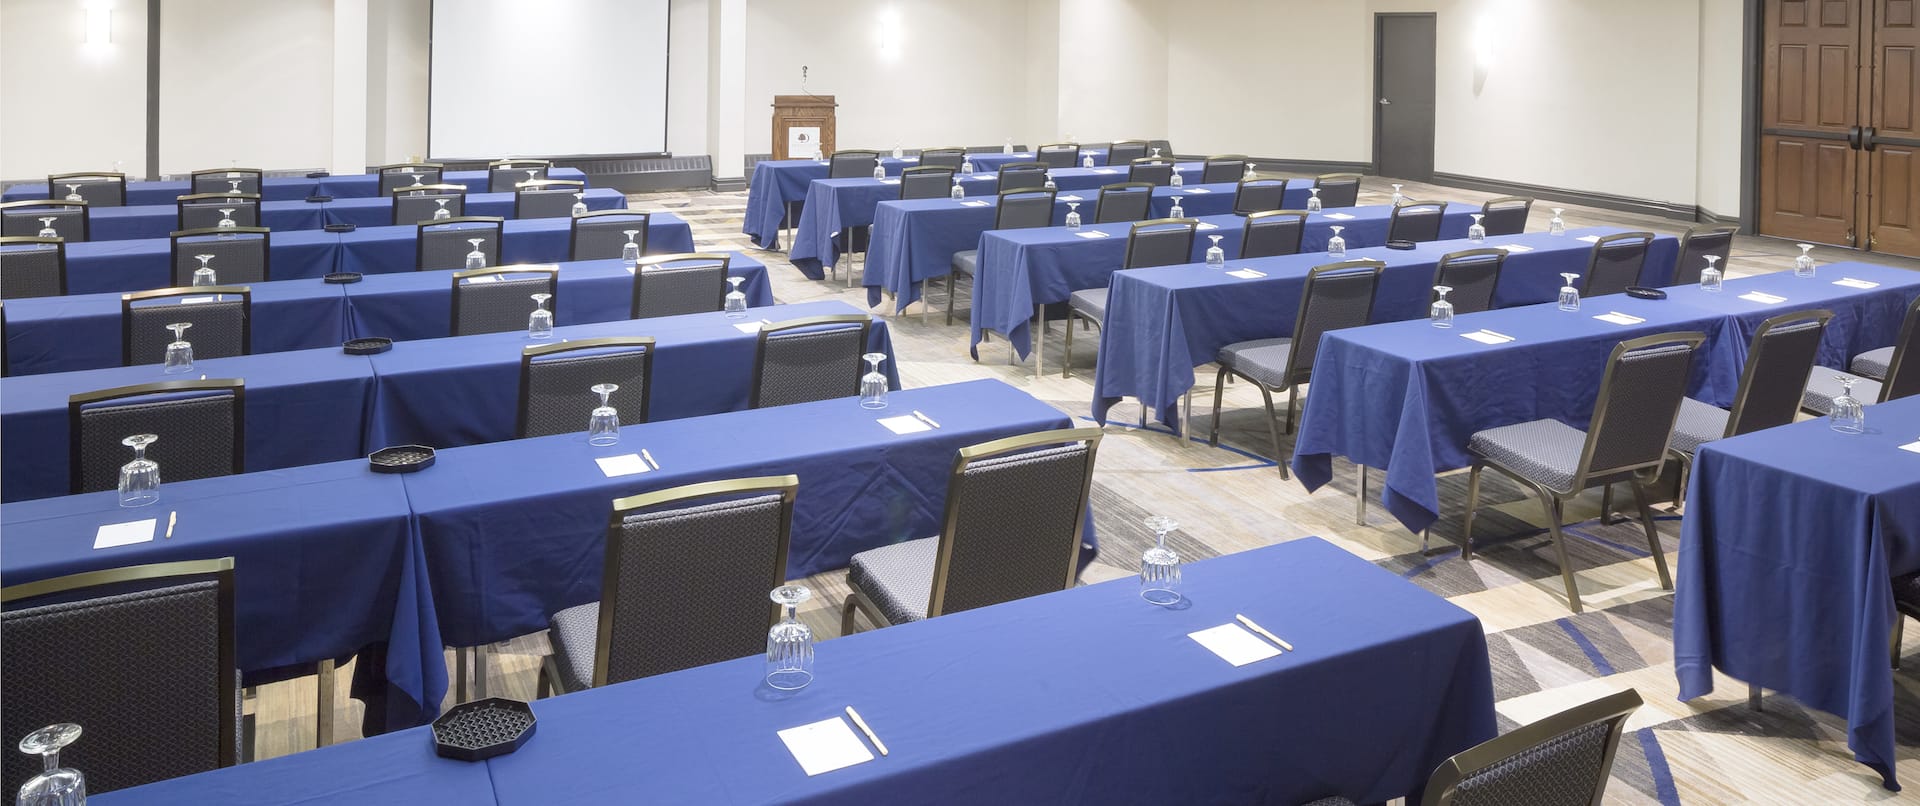 Classroom Setup in Meeting Space With Tables Covered in Blue Linens and Chairs Facing Presentation Screen and Podium